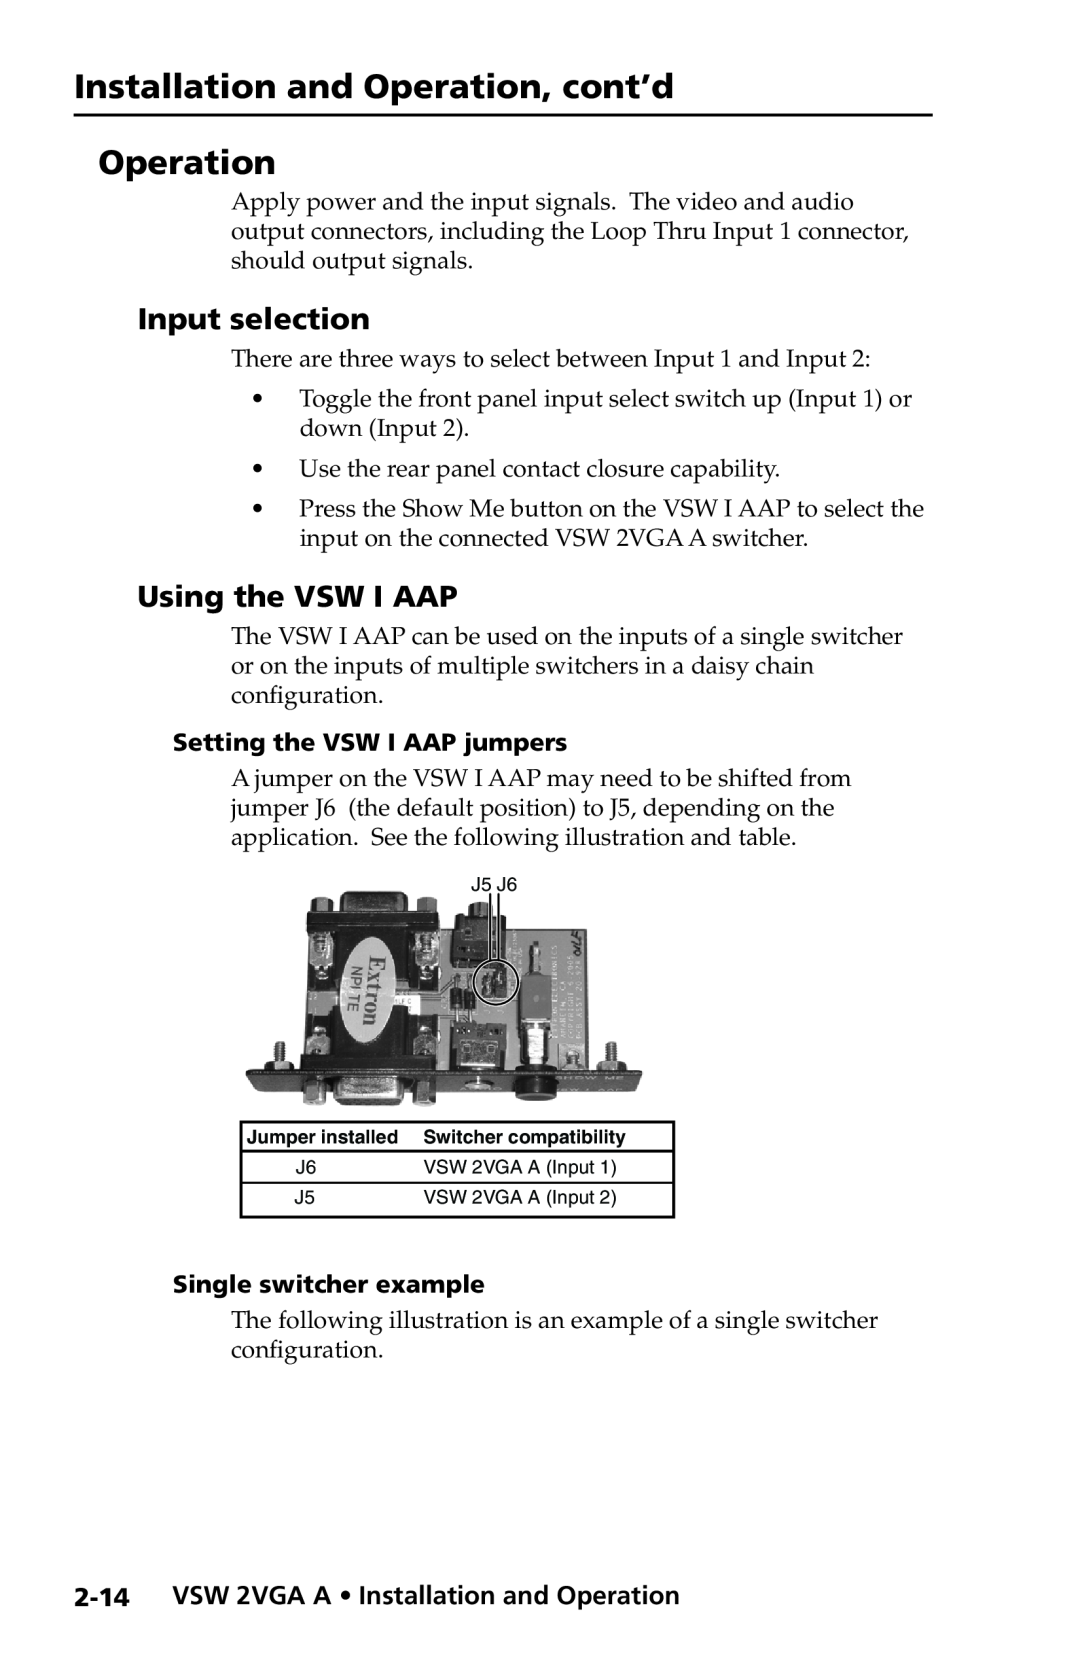 Extron electronic user manual Input selection, Using the VSW I AAP, VSW 2VGA A Installation and Operation 